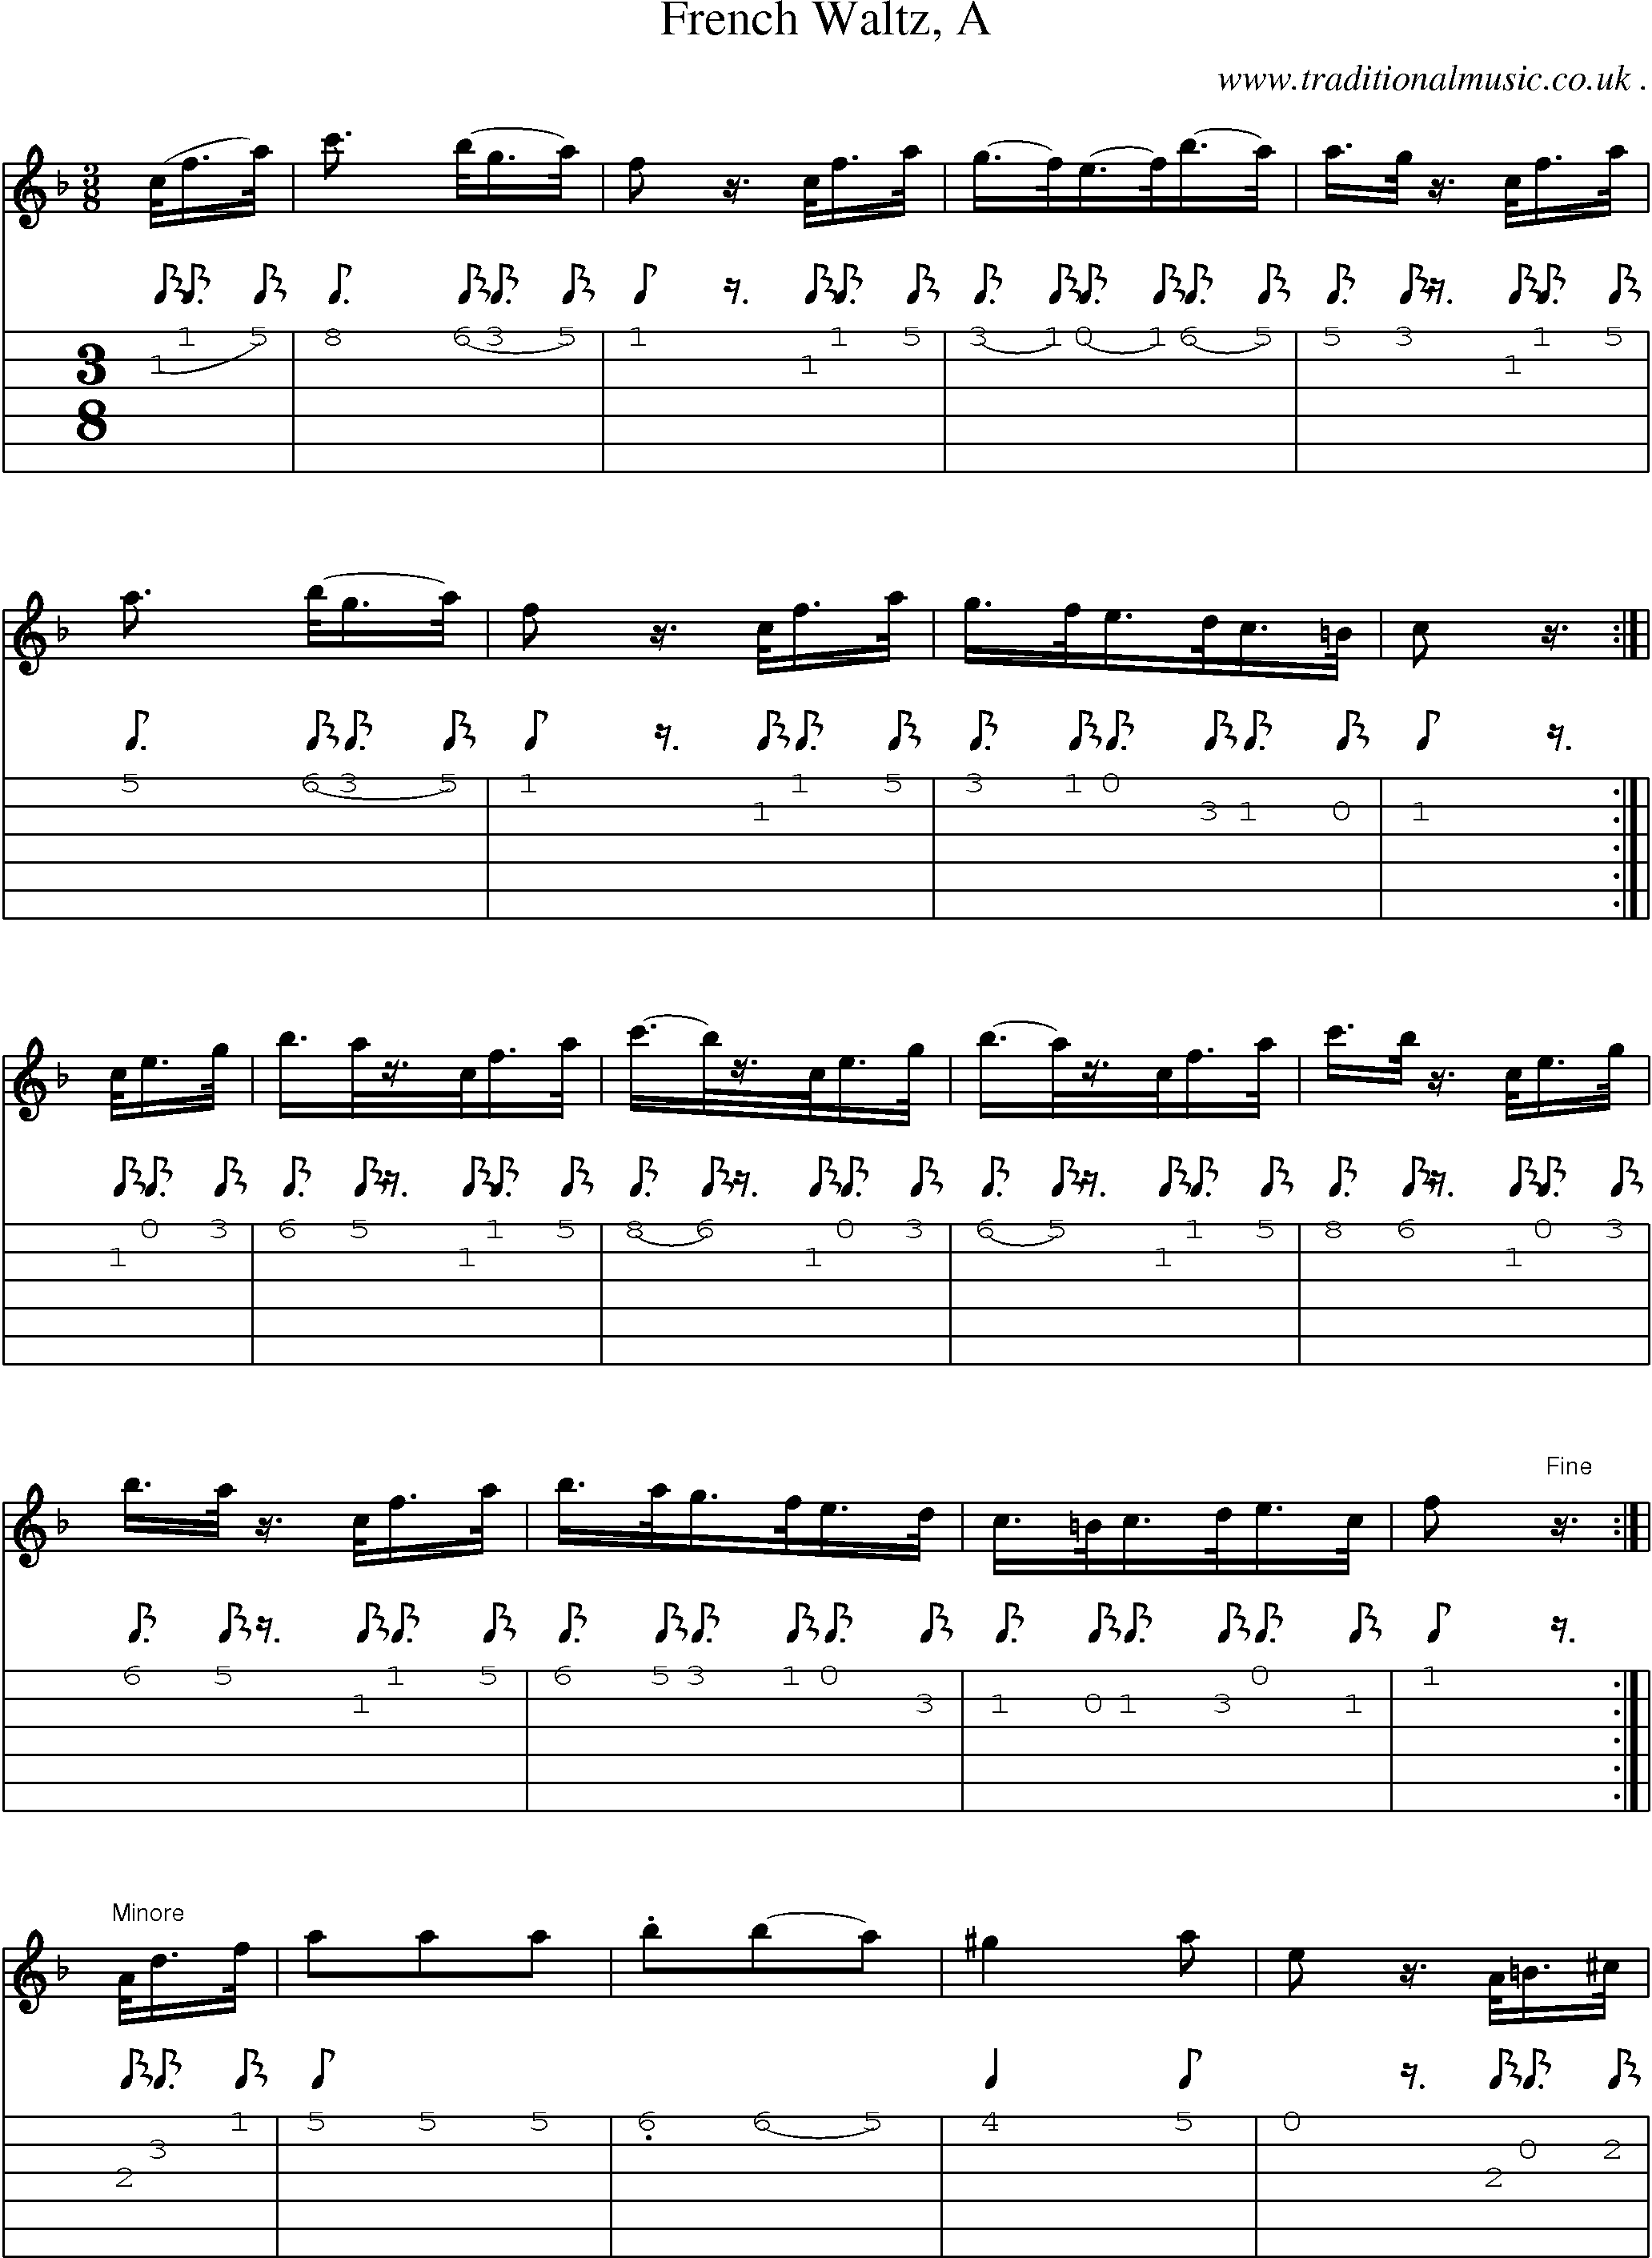 Sheet-Music and Guitar Tabs for French Waltz A